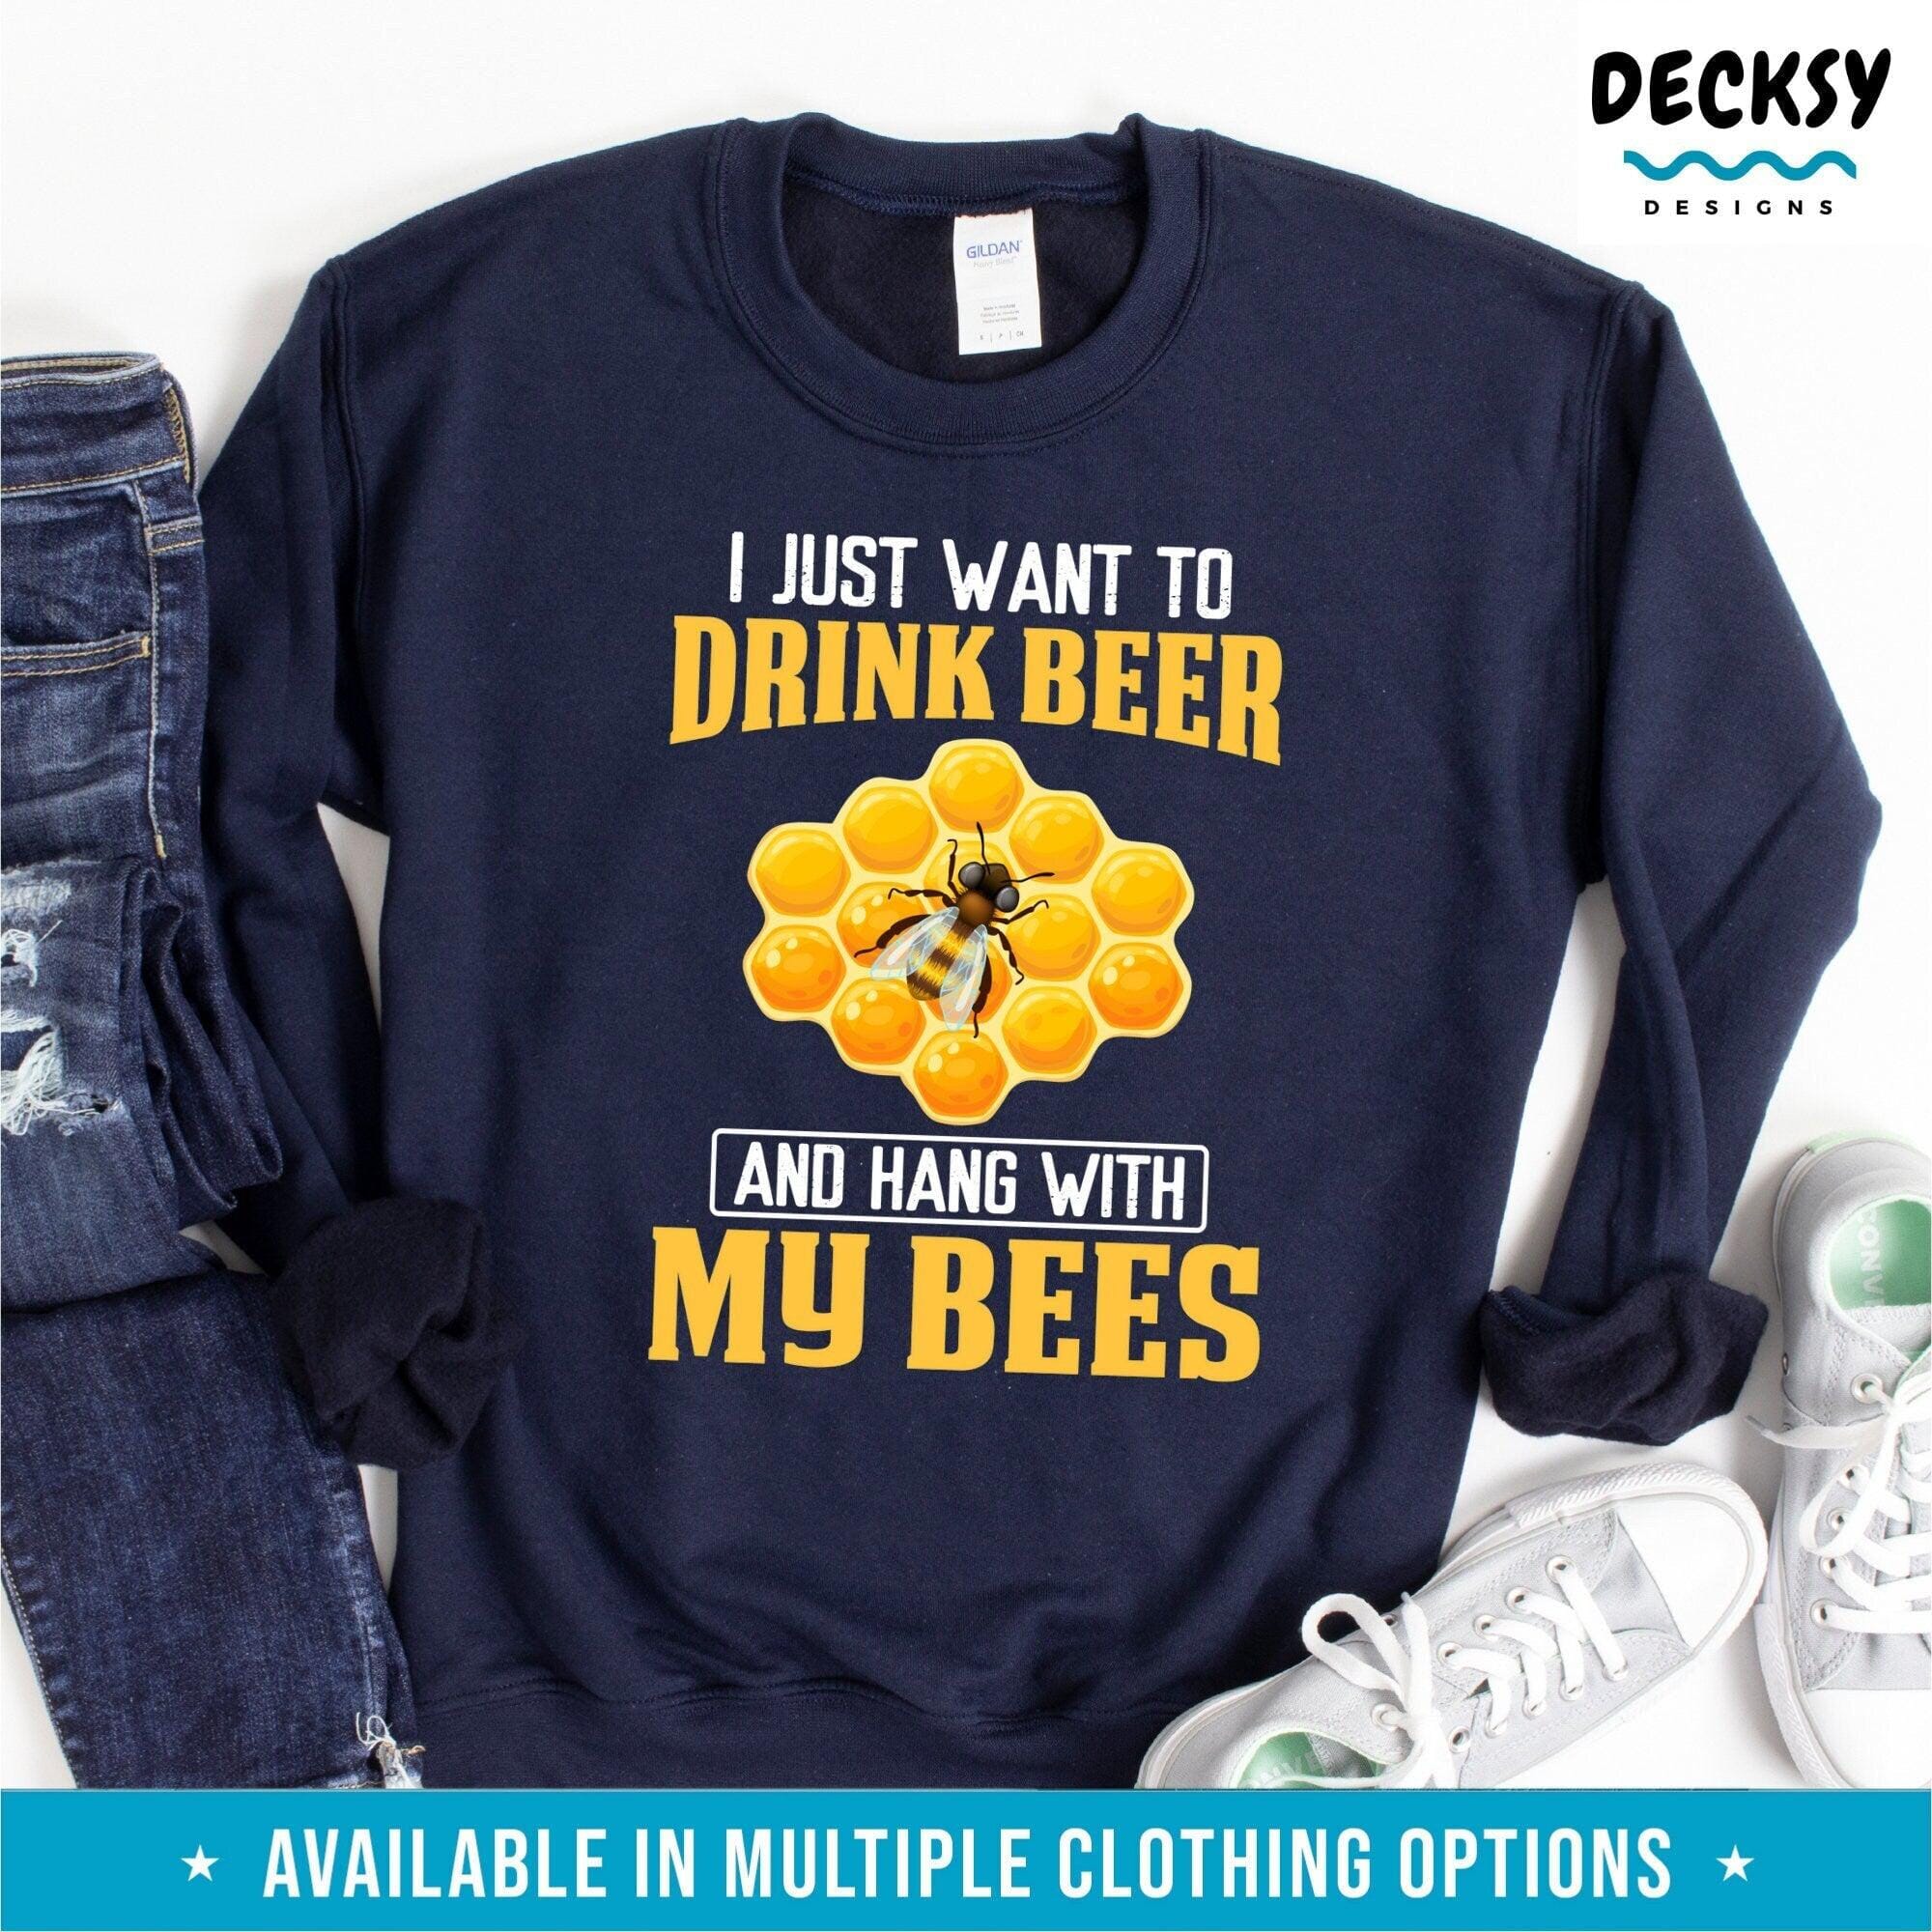 Beekeeping T-Shirt, Gift For Beer Lover-Clothing:Gender-Neutral Adult Clothing:Tops & Tees:T-shirts:Graphic Tees-DecksyDesigns